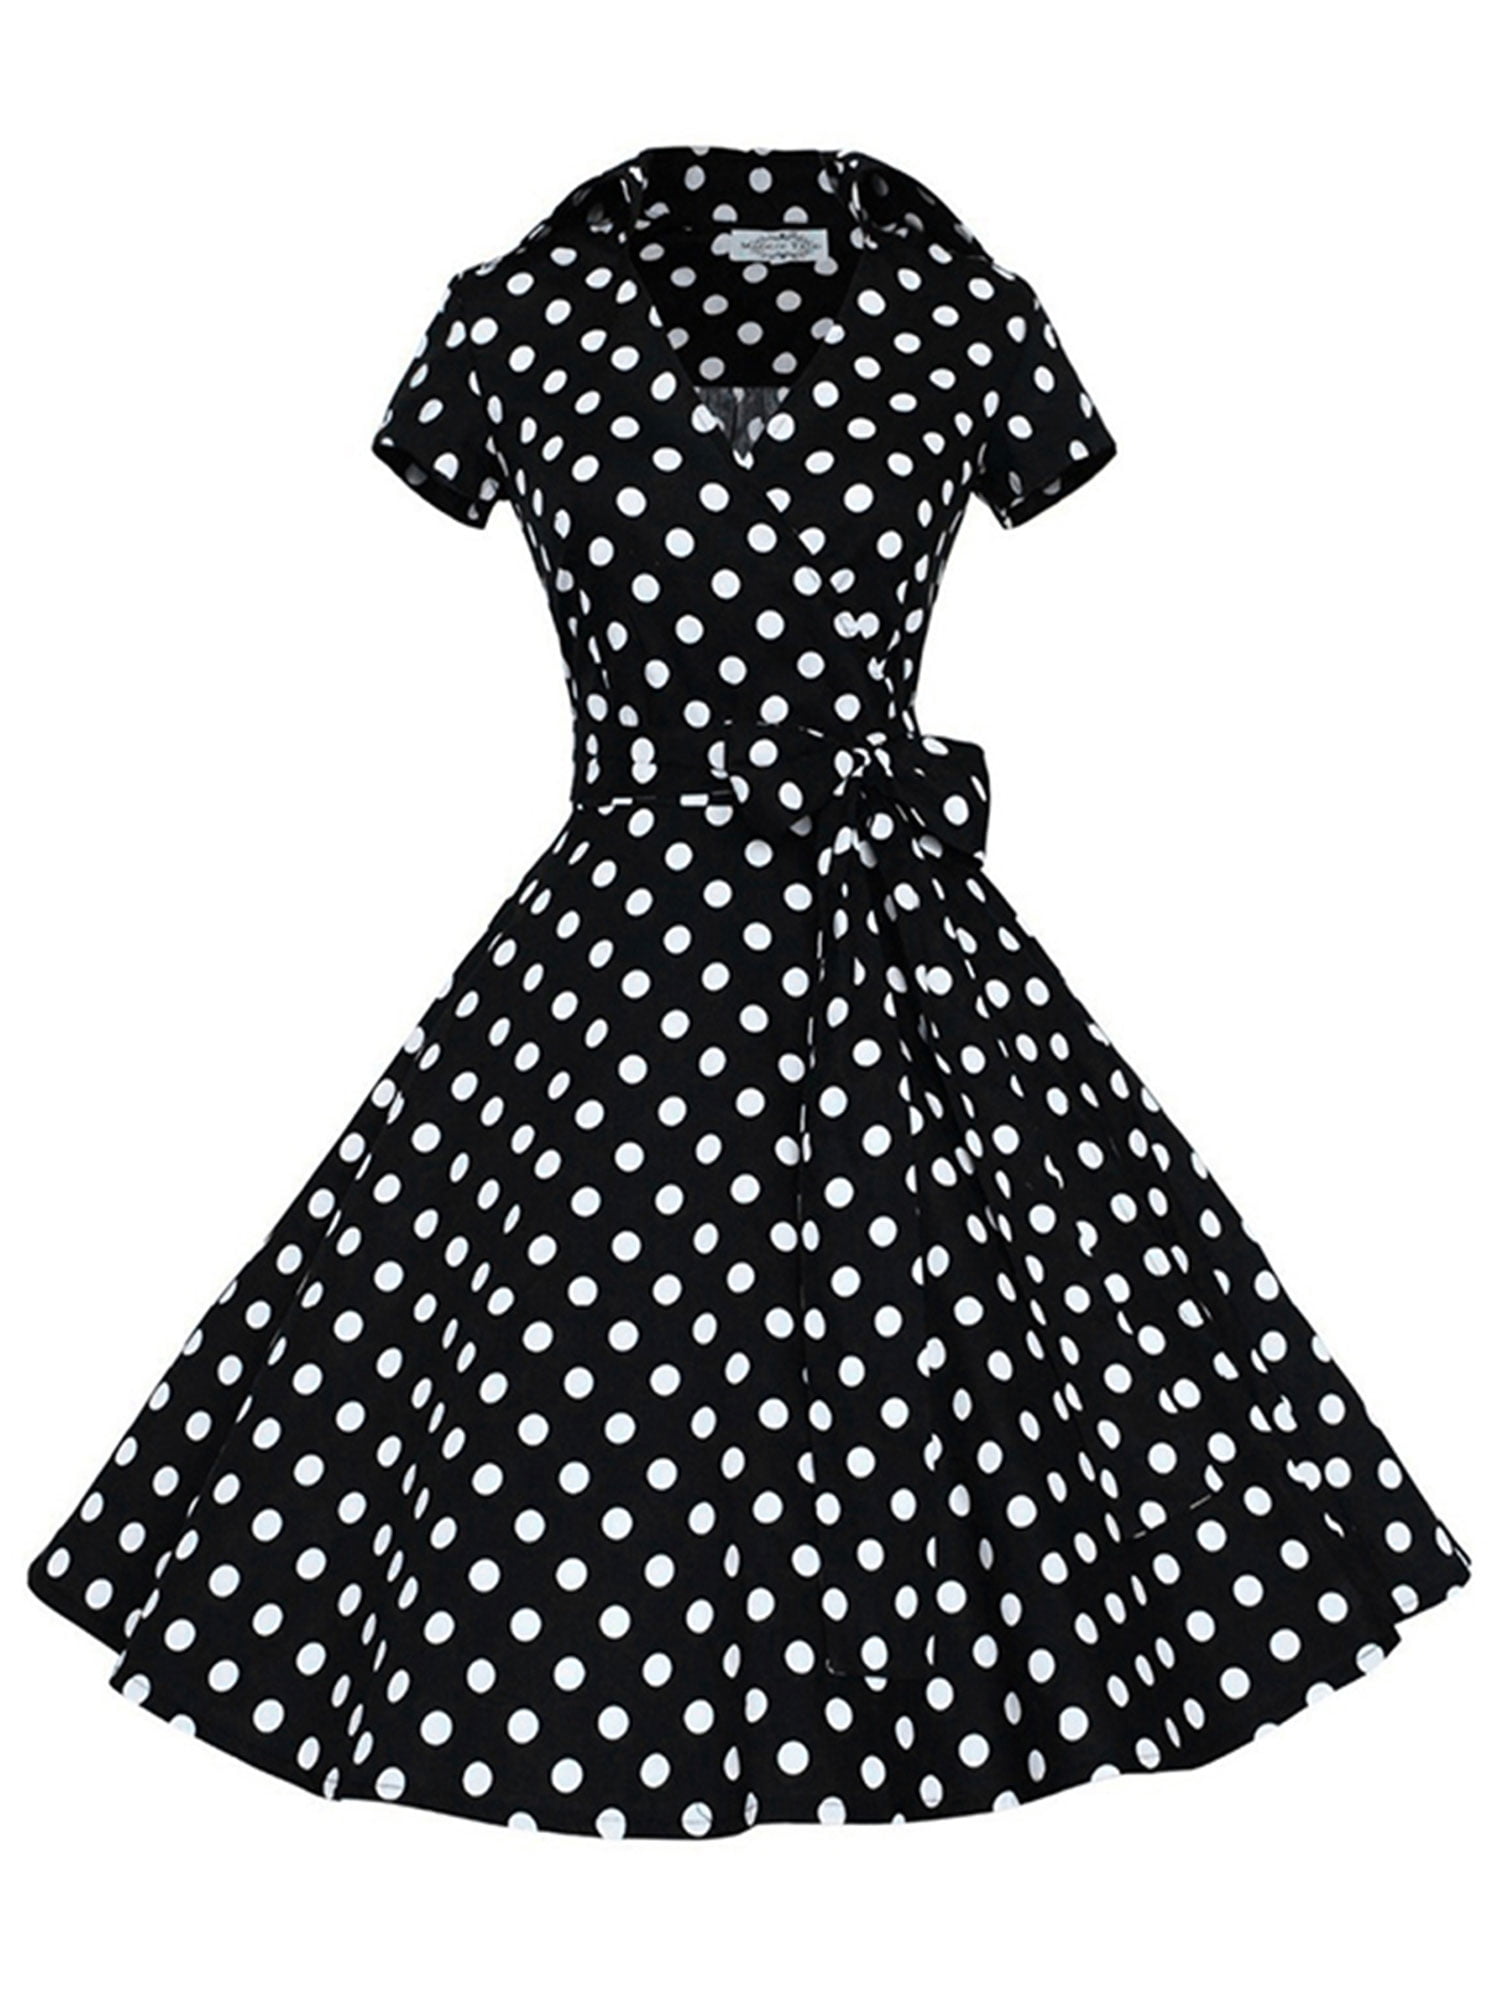 Women Vintage Style 50'S 60'S Swing Pinup Retro casual Housewife Christmas  Party Ball Fashion Dress - Walmart.com